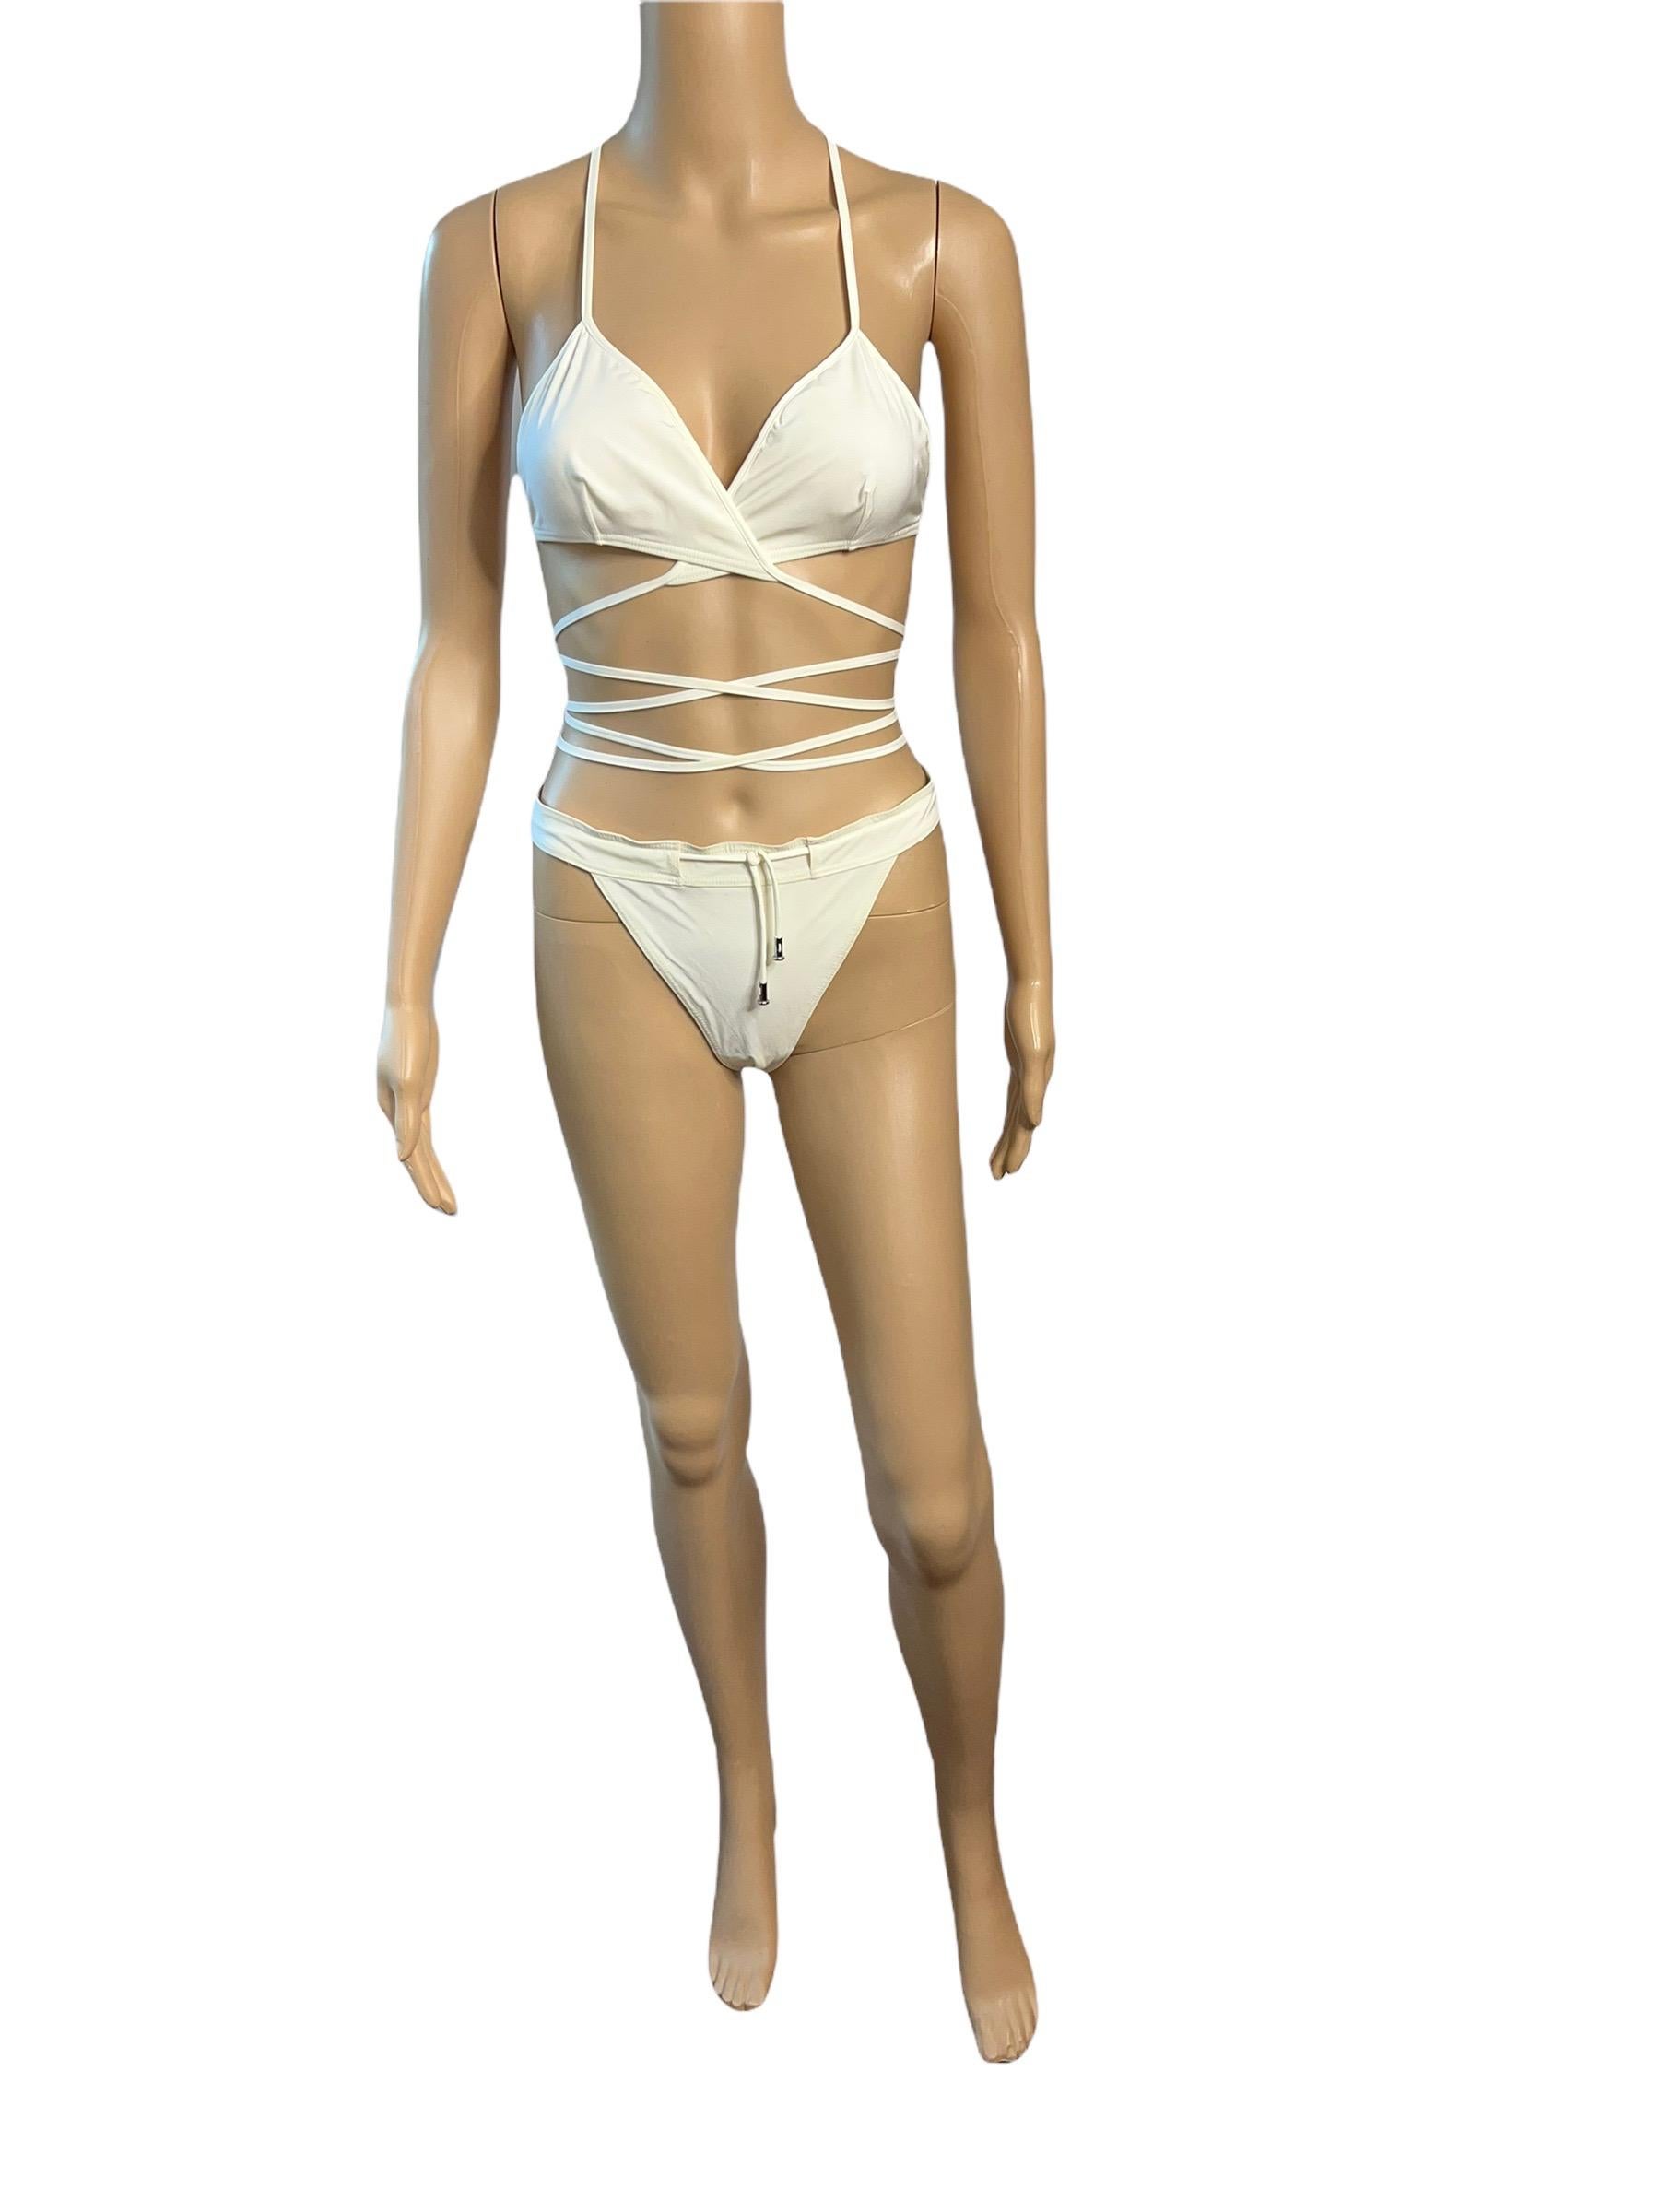 Tom Ford for Gucci S/S 2000 Runway Wrap Ivory Two-Piece Bikini Swimsuit Taille L

Look 29 de la collection printemps 2000.
